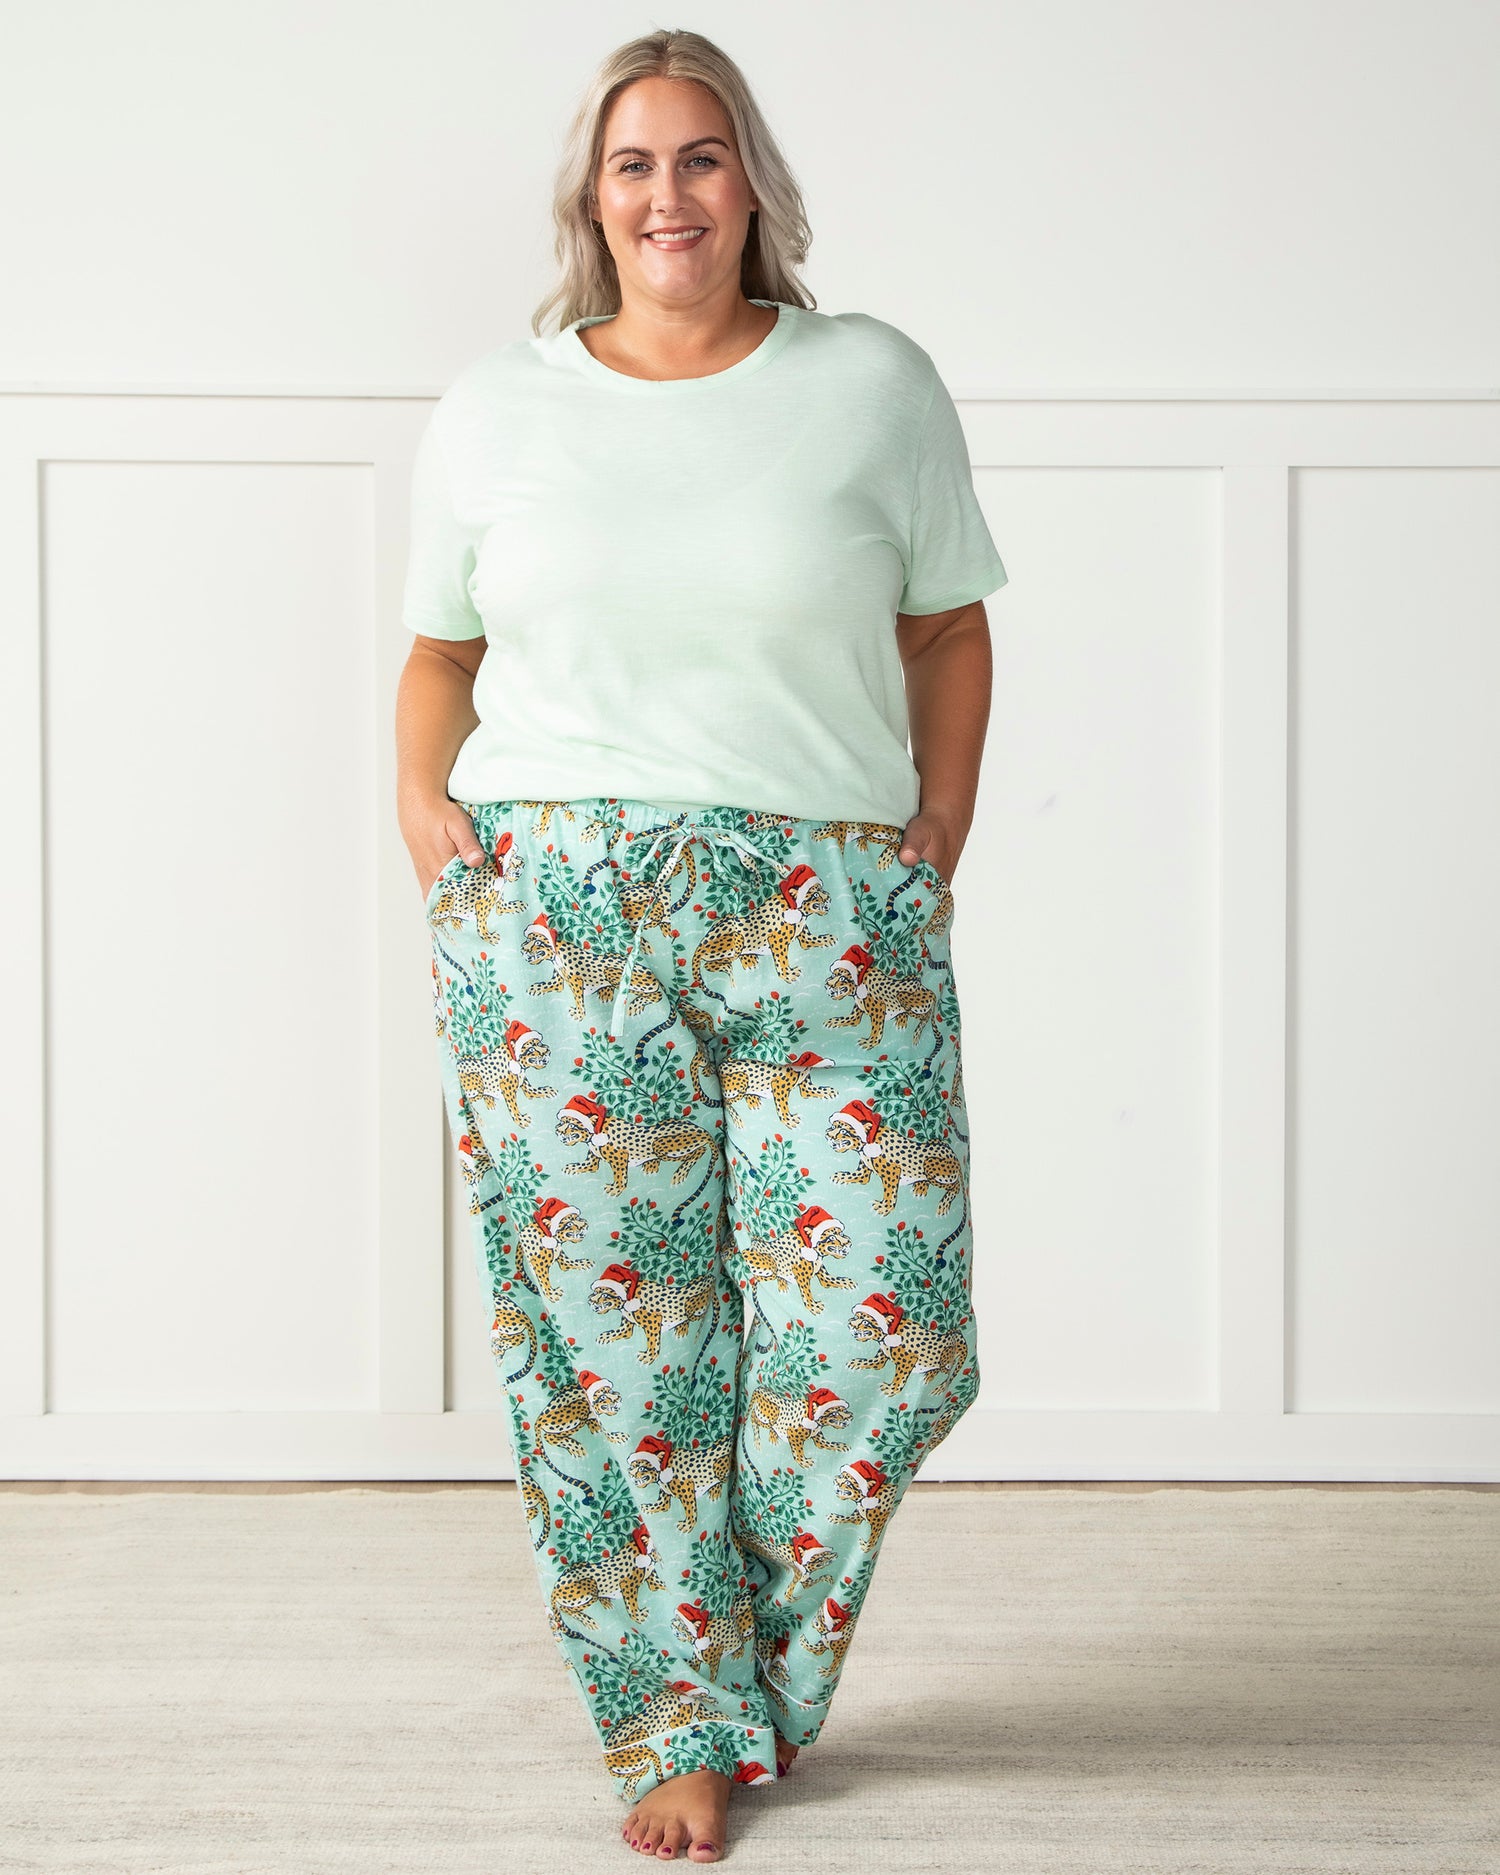 Holly Jolly Bagheera - Tall Flannel Pajama Pants - Frosted Mint - Printfresh